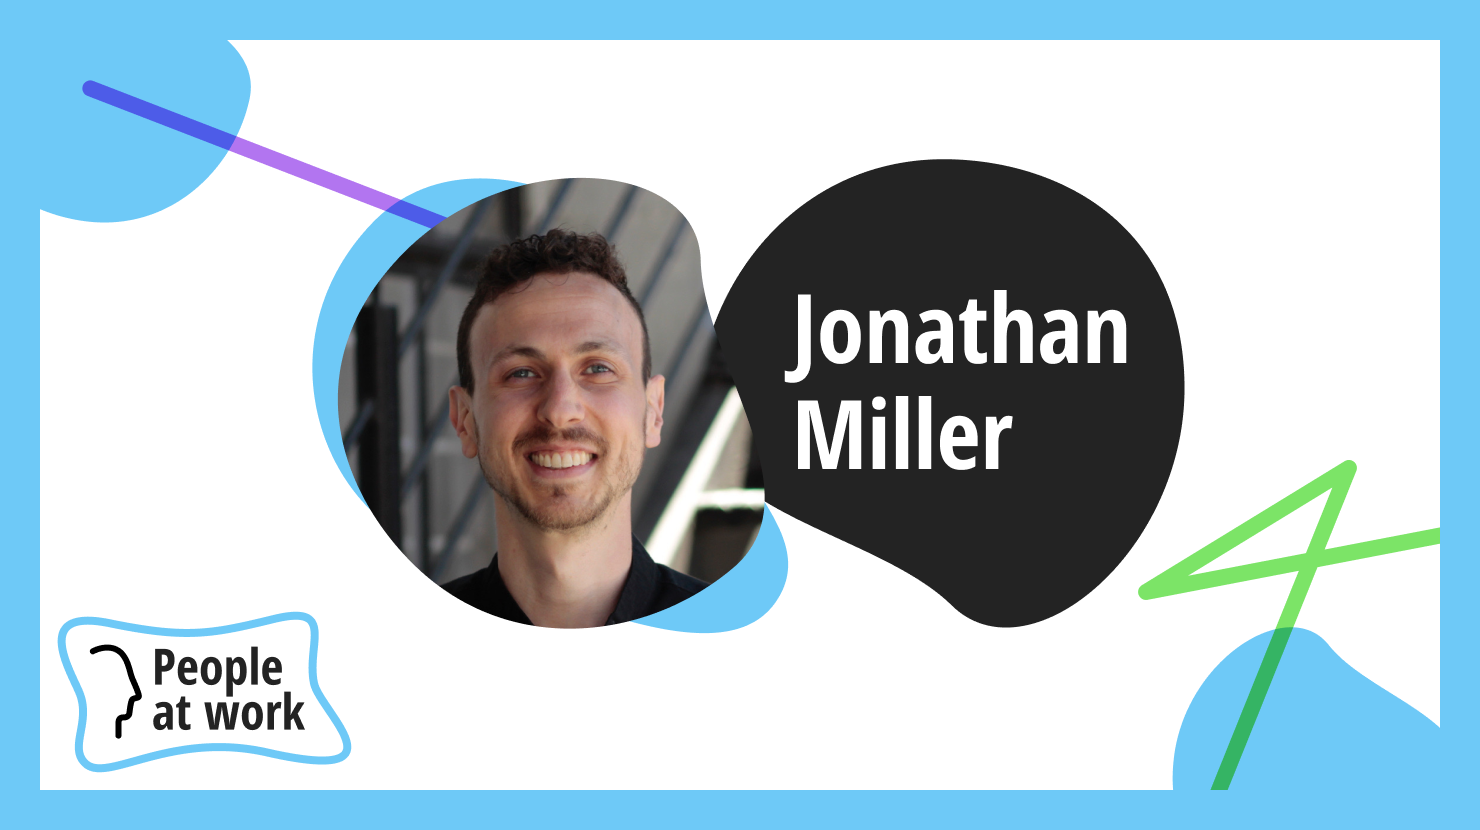 You’re more than a brain taxi with Jonathan Miller